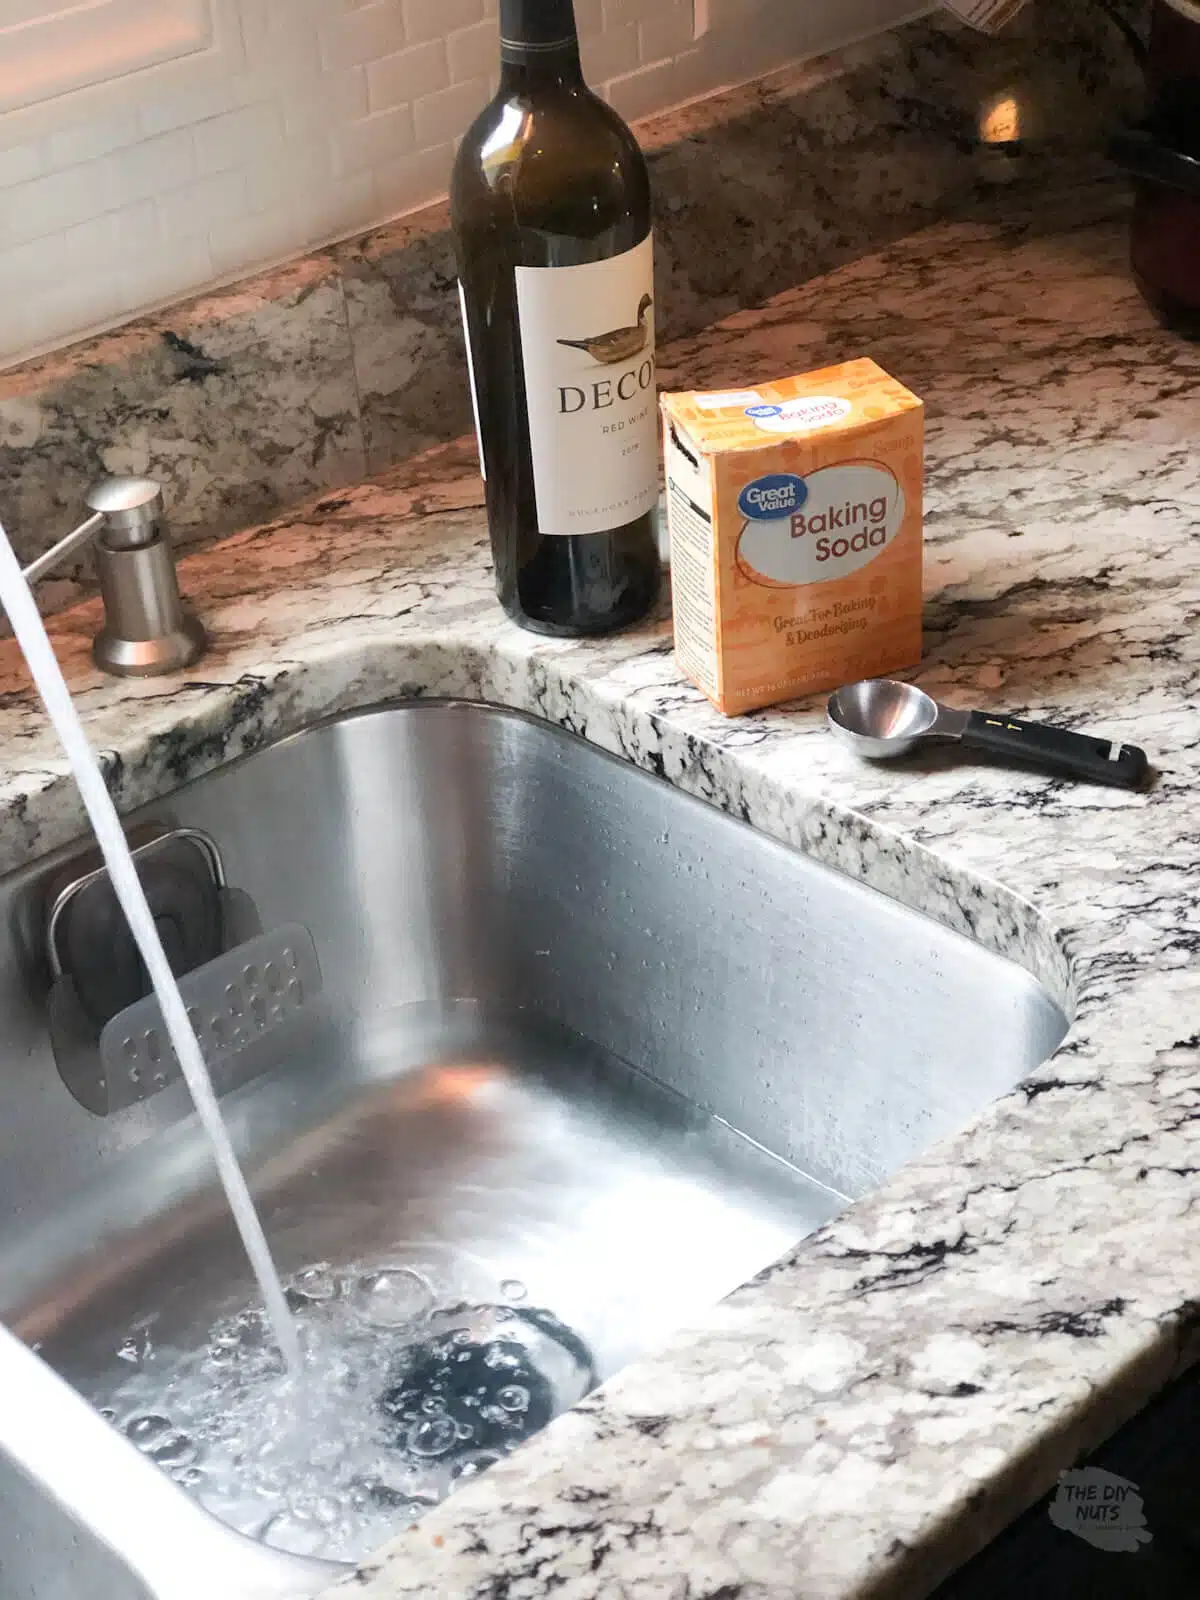 baking soda to remove wine label on bottle on counter